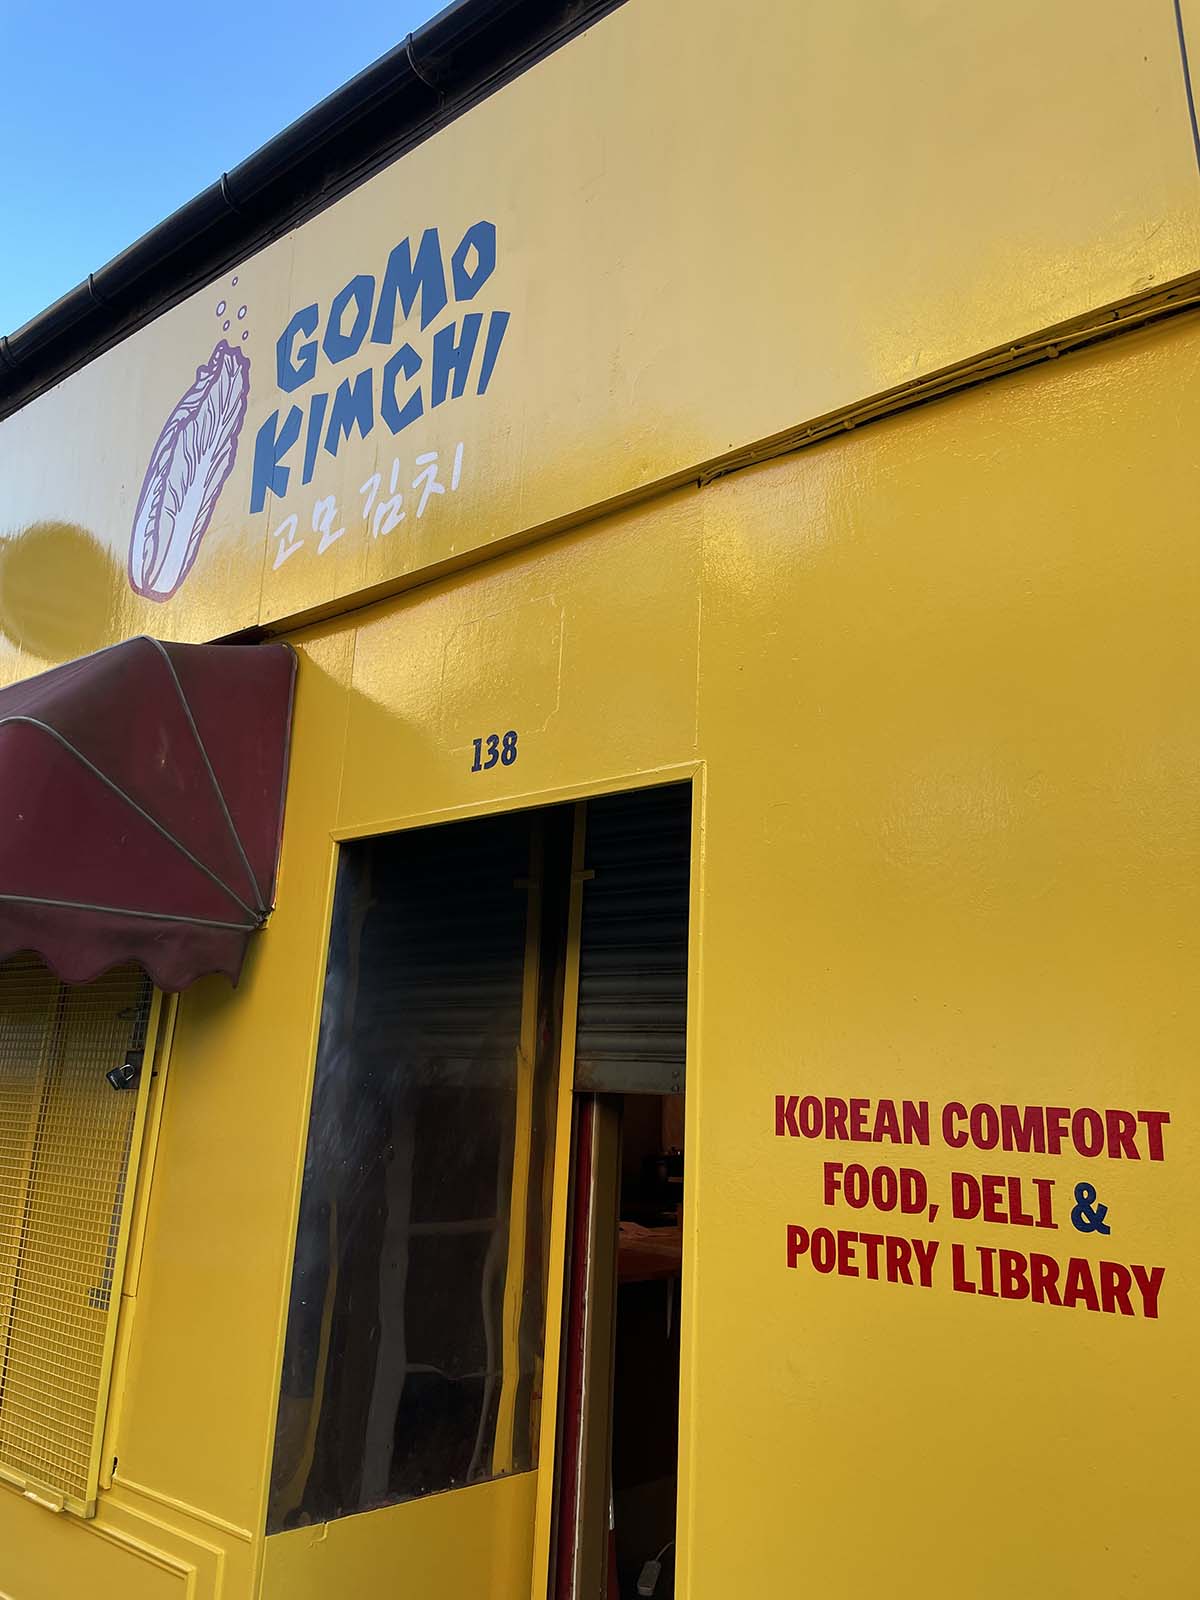 a bright yellow store front with 'Gomo Kimchi' written at the top and 'Korean Comfort Food, Deli & Poetry Library" written by the door